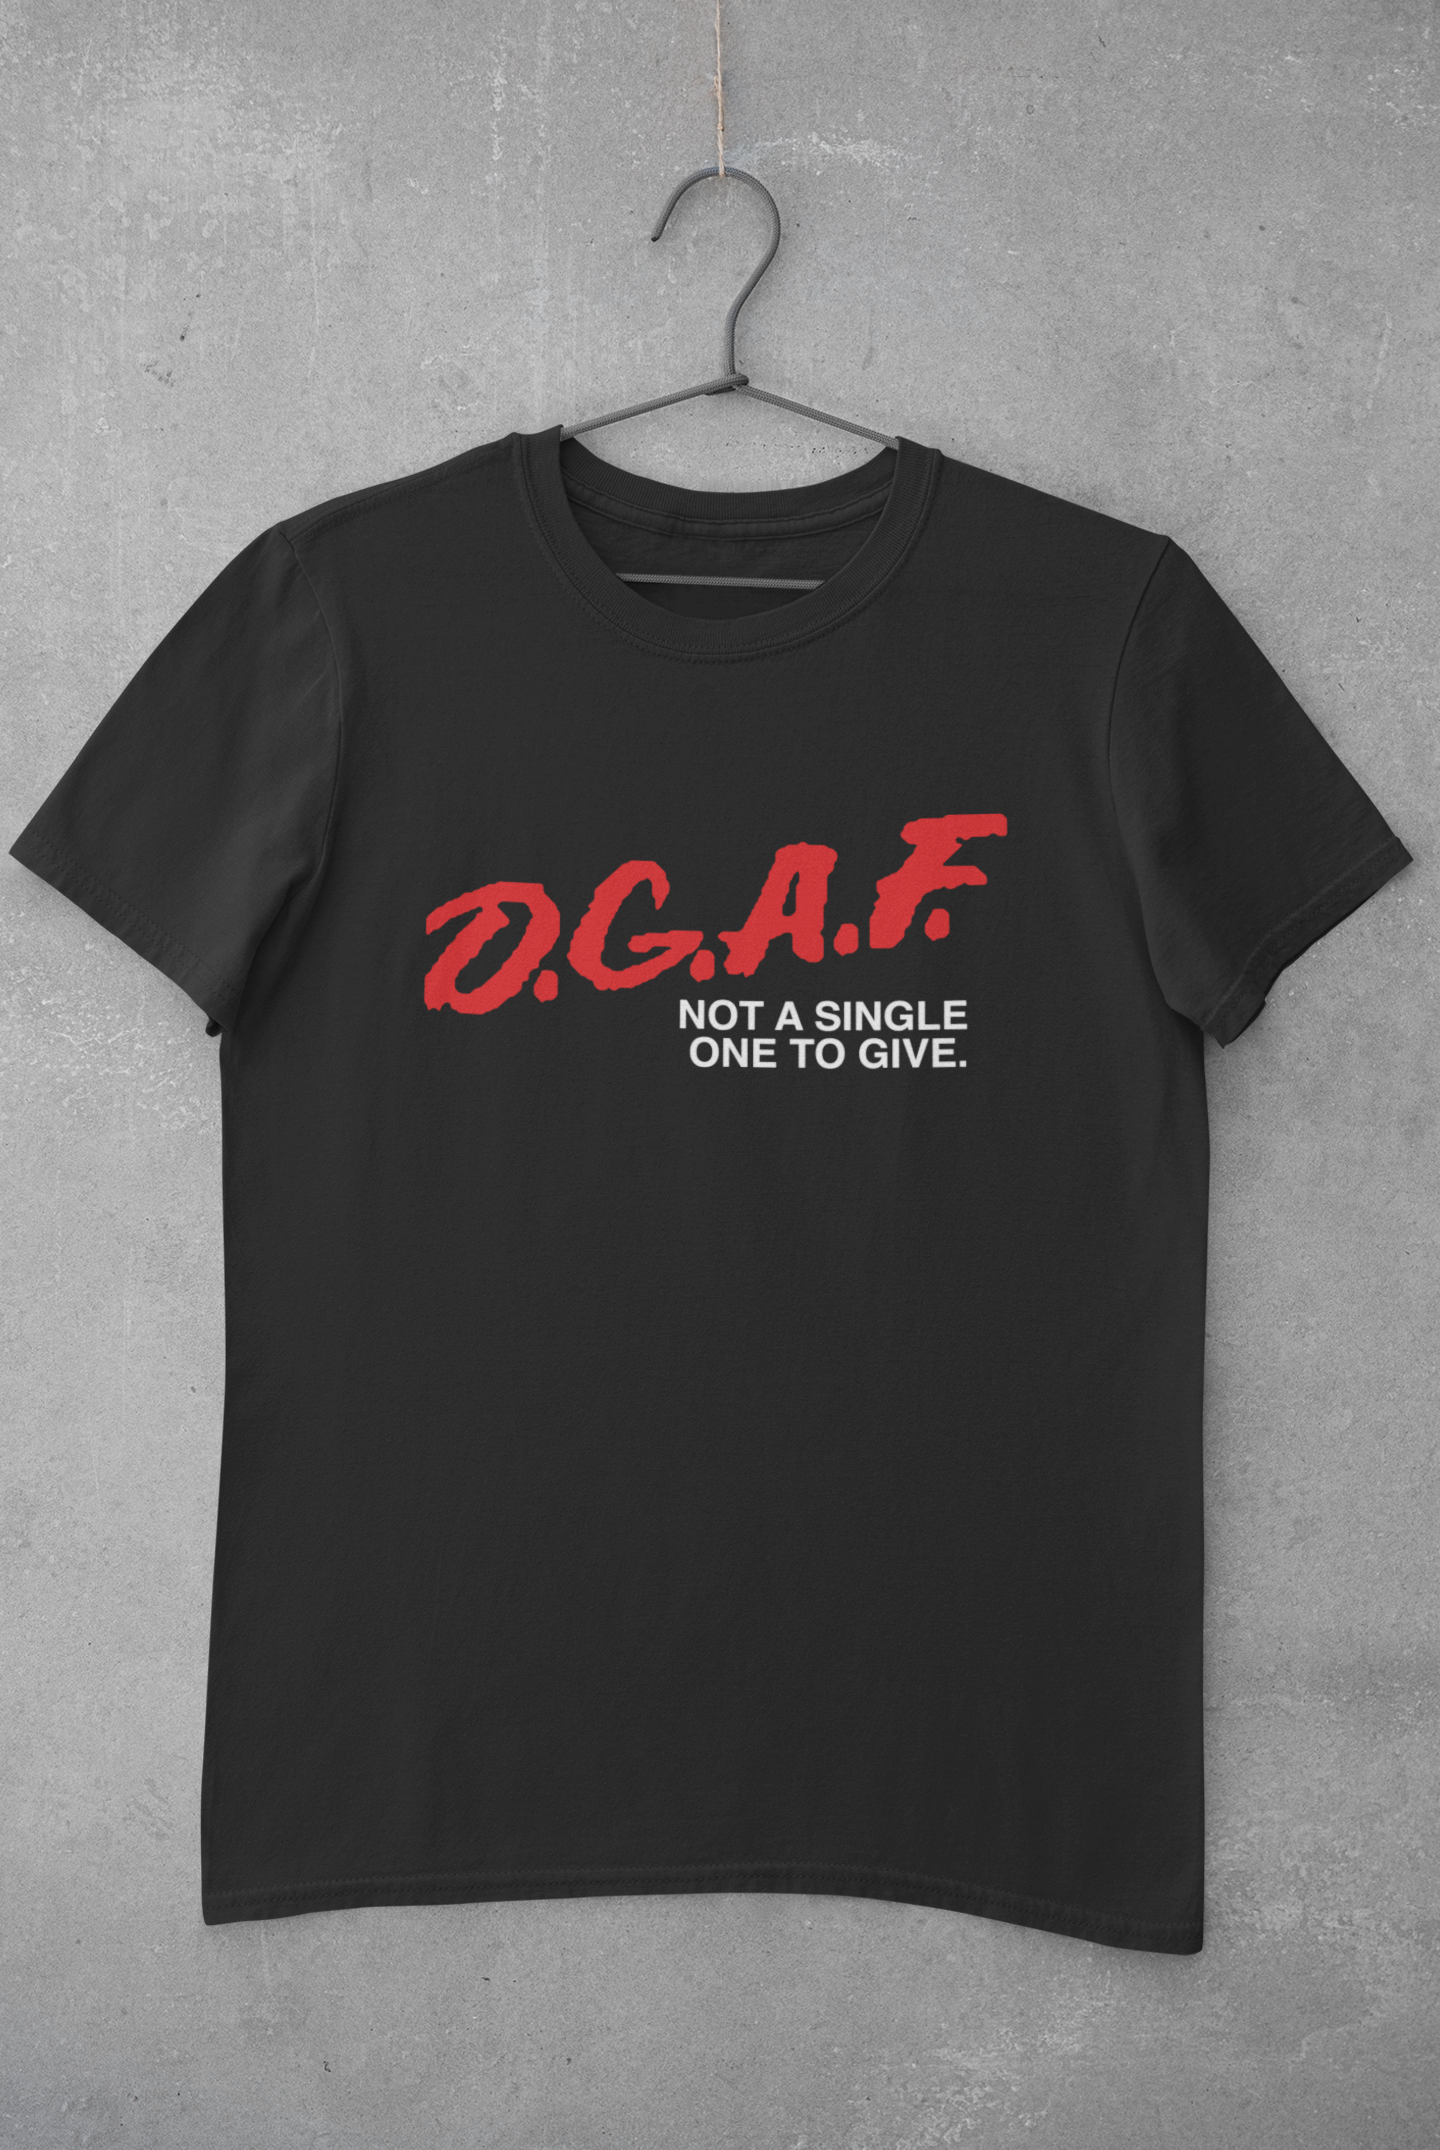 D.G.A.F. - Not One. In-Stock